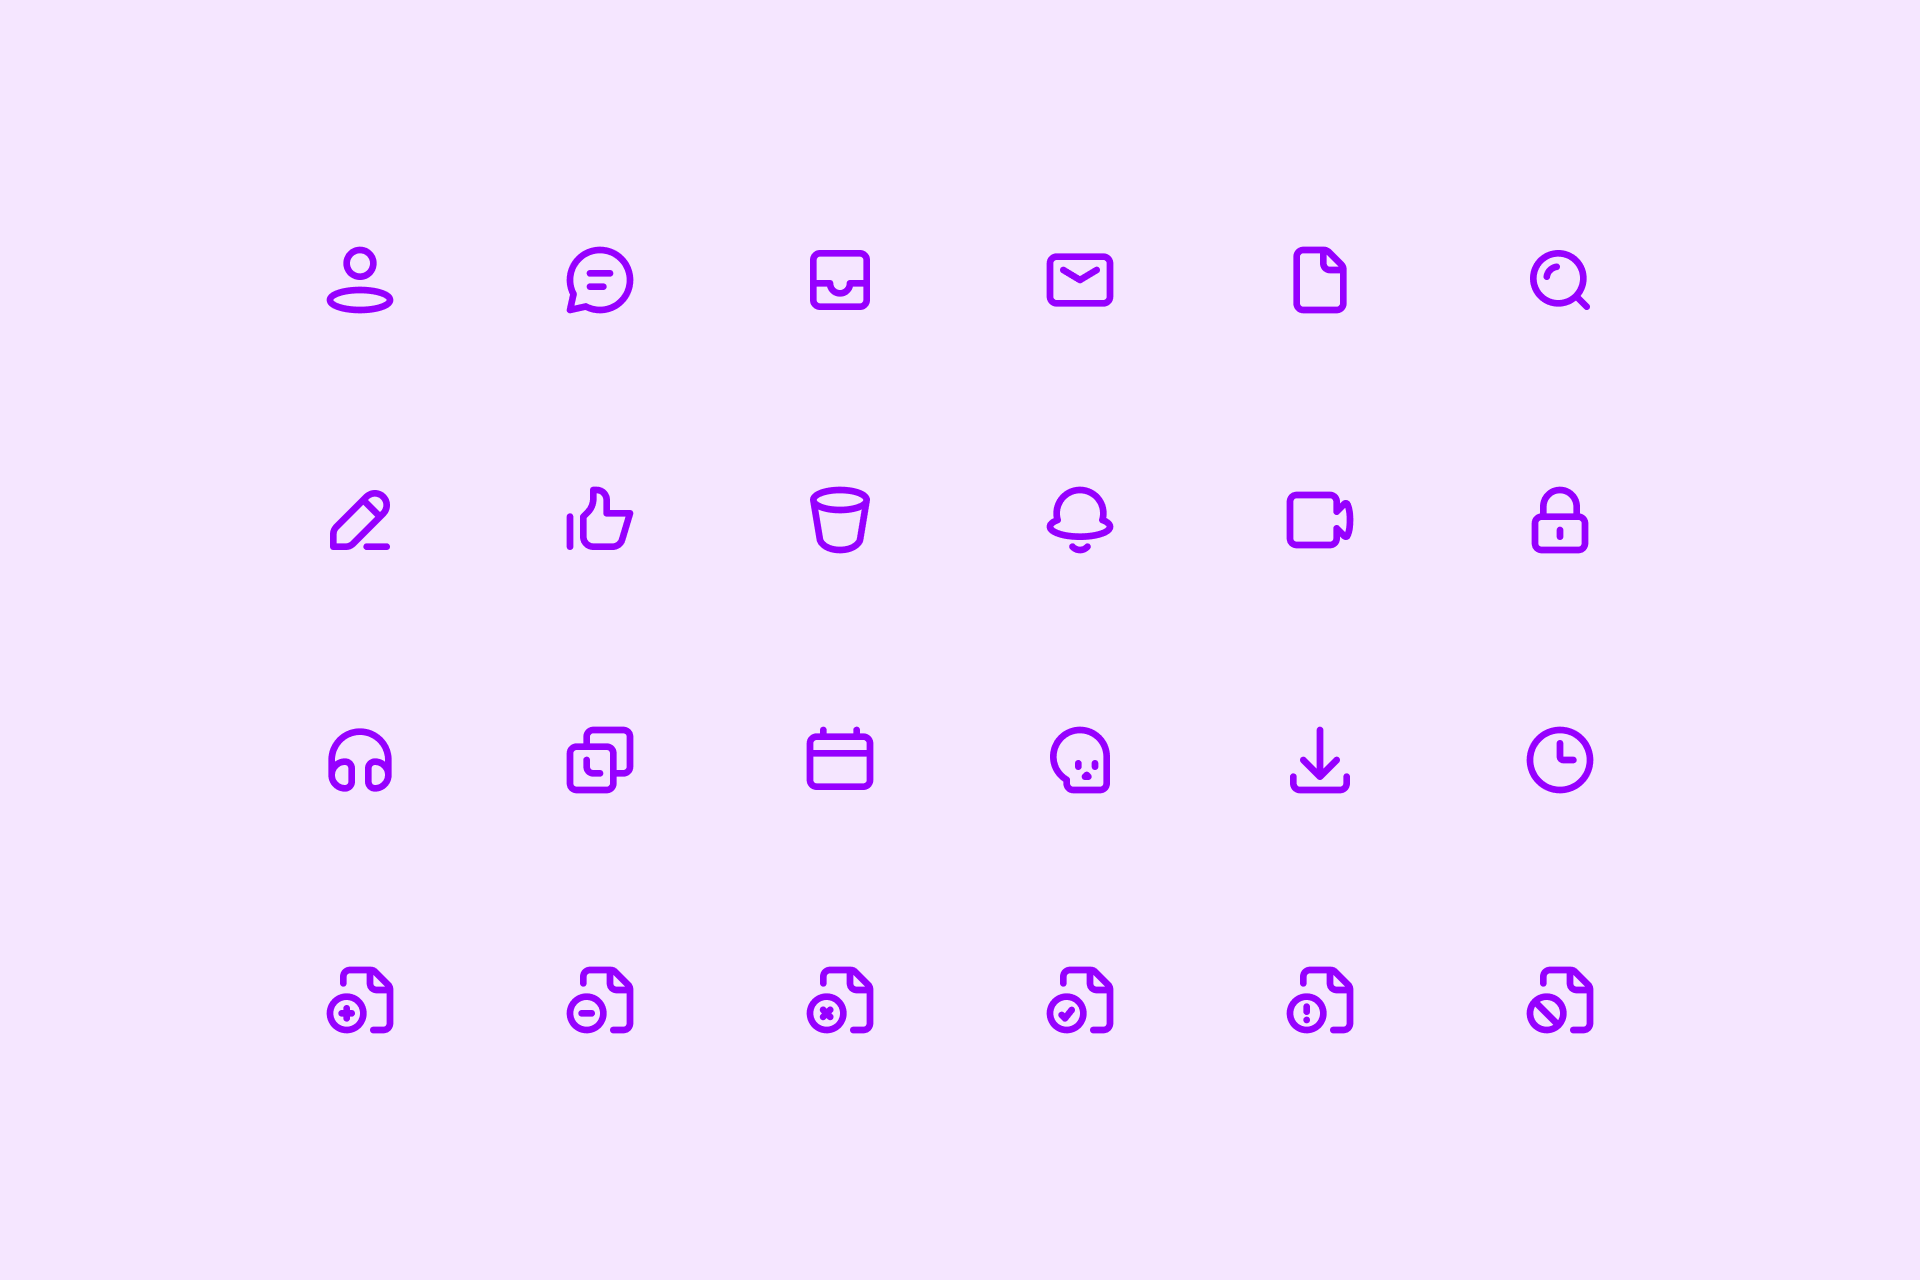 How to design icons in Figma